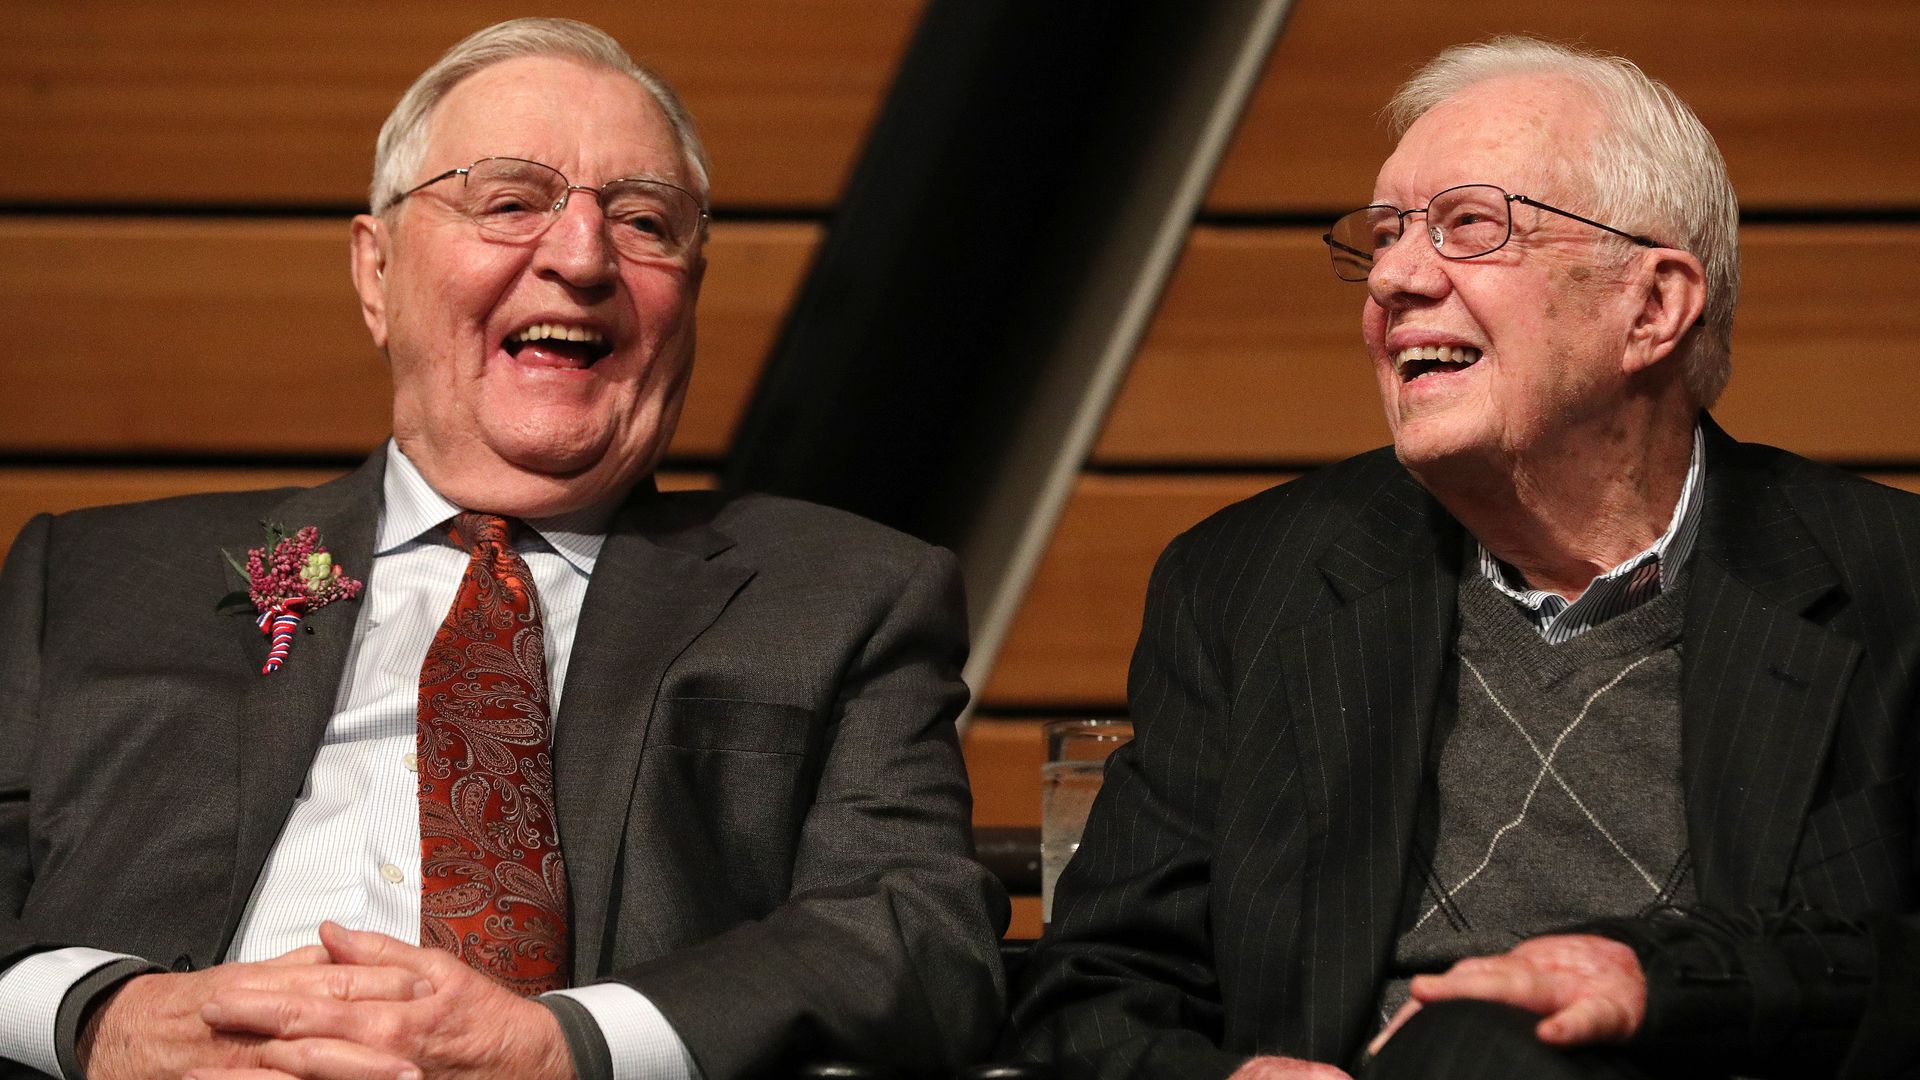 Walter Mondale and Jimmy Carter sit next to each other